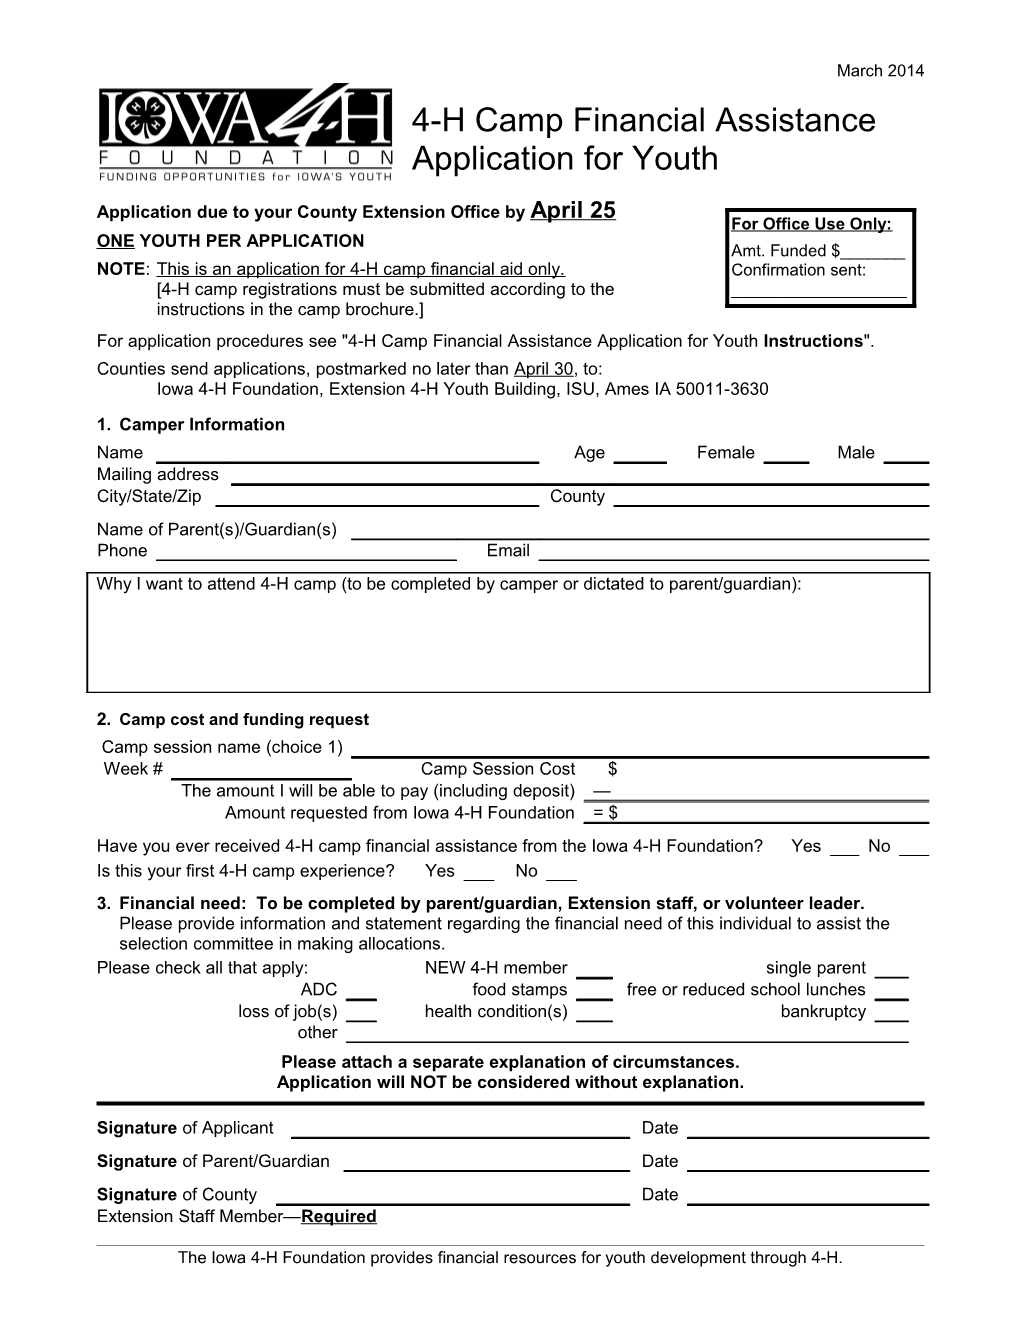 Application for Youth Instructions